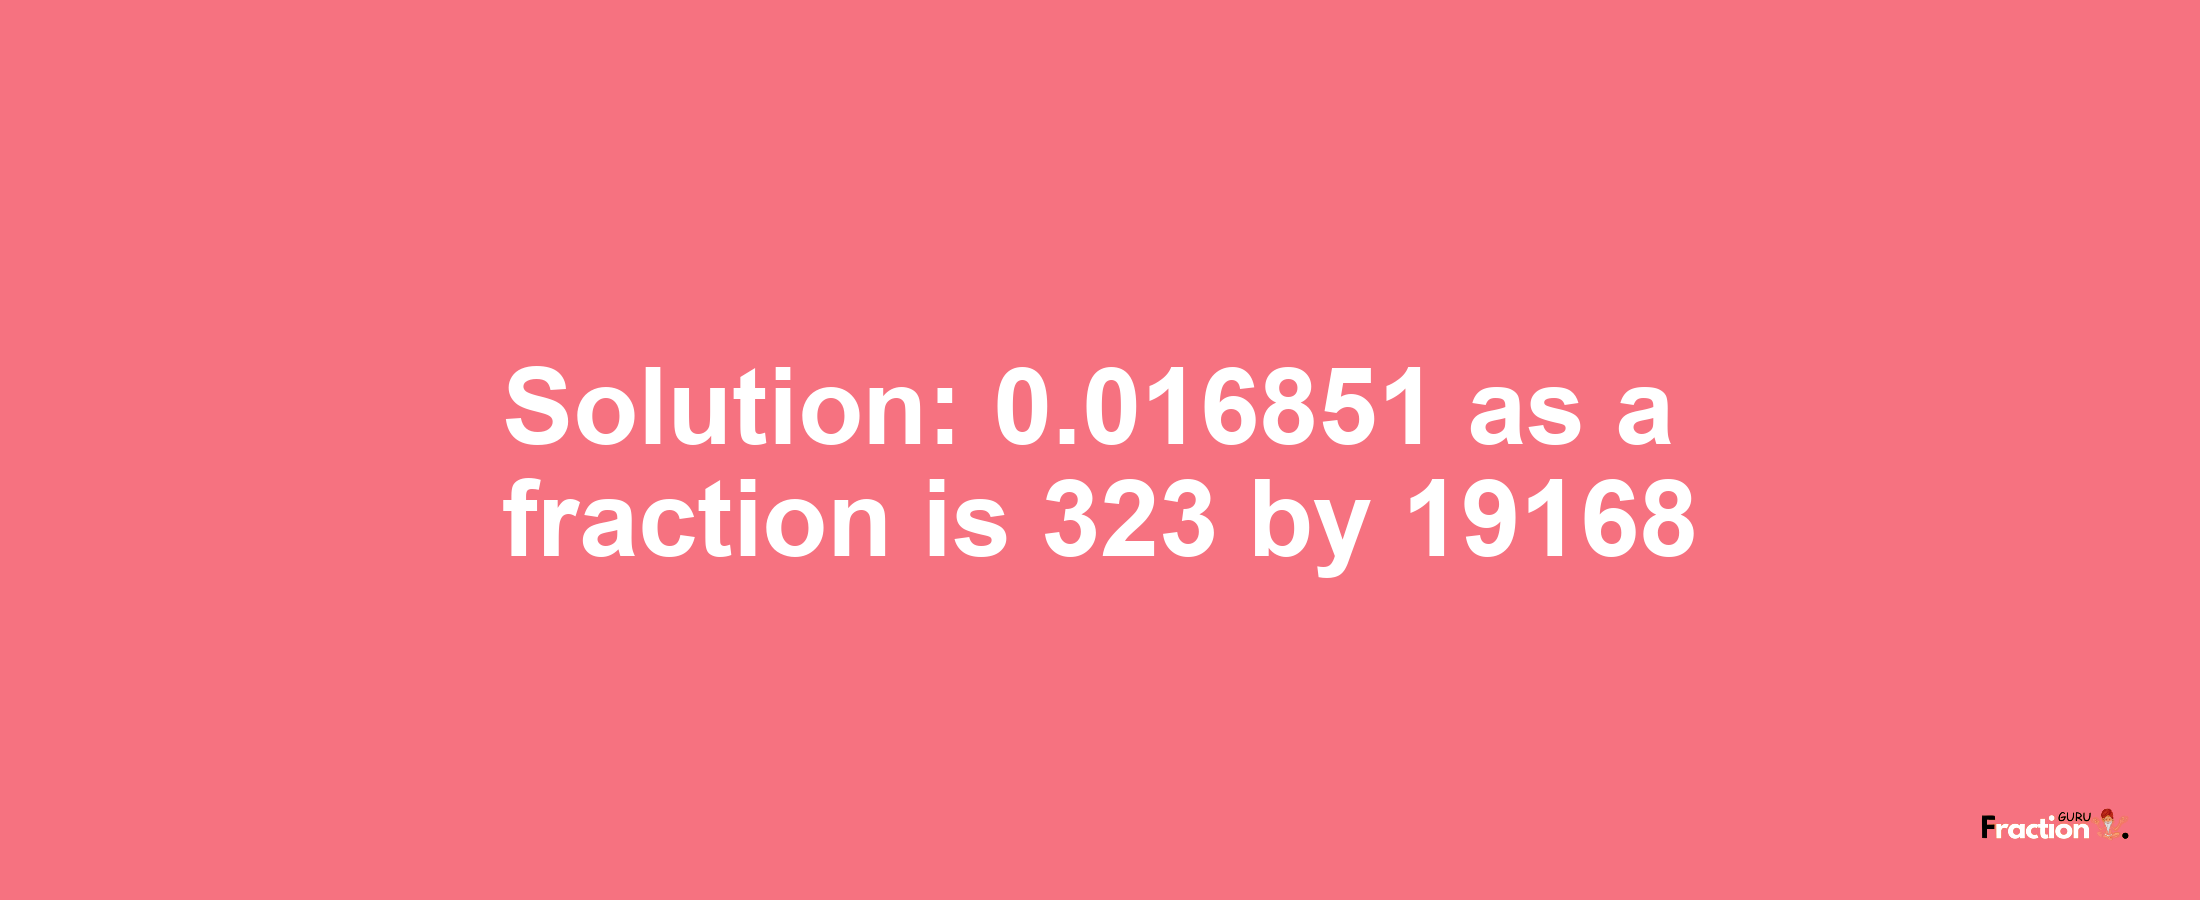 Solution:0.016851 as a fraction is 323/19168